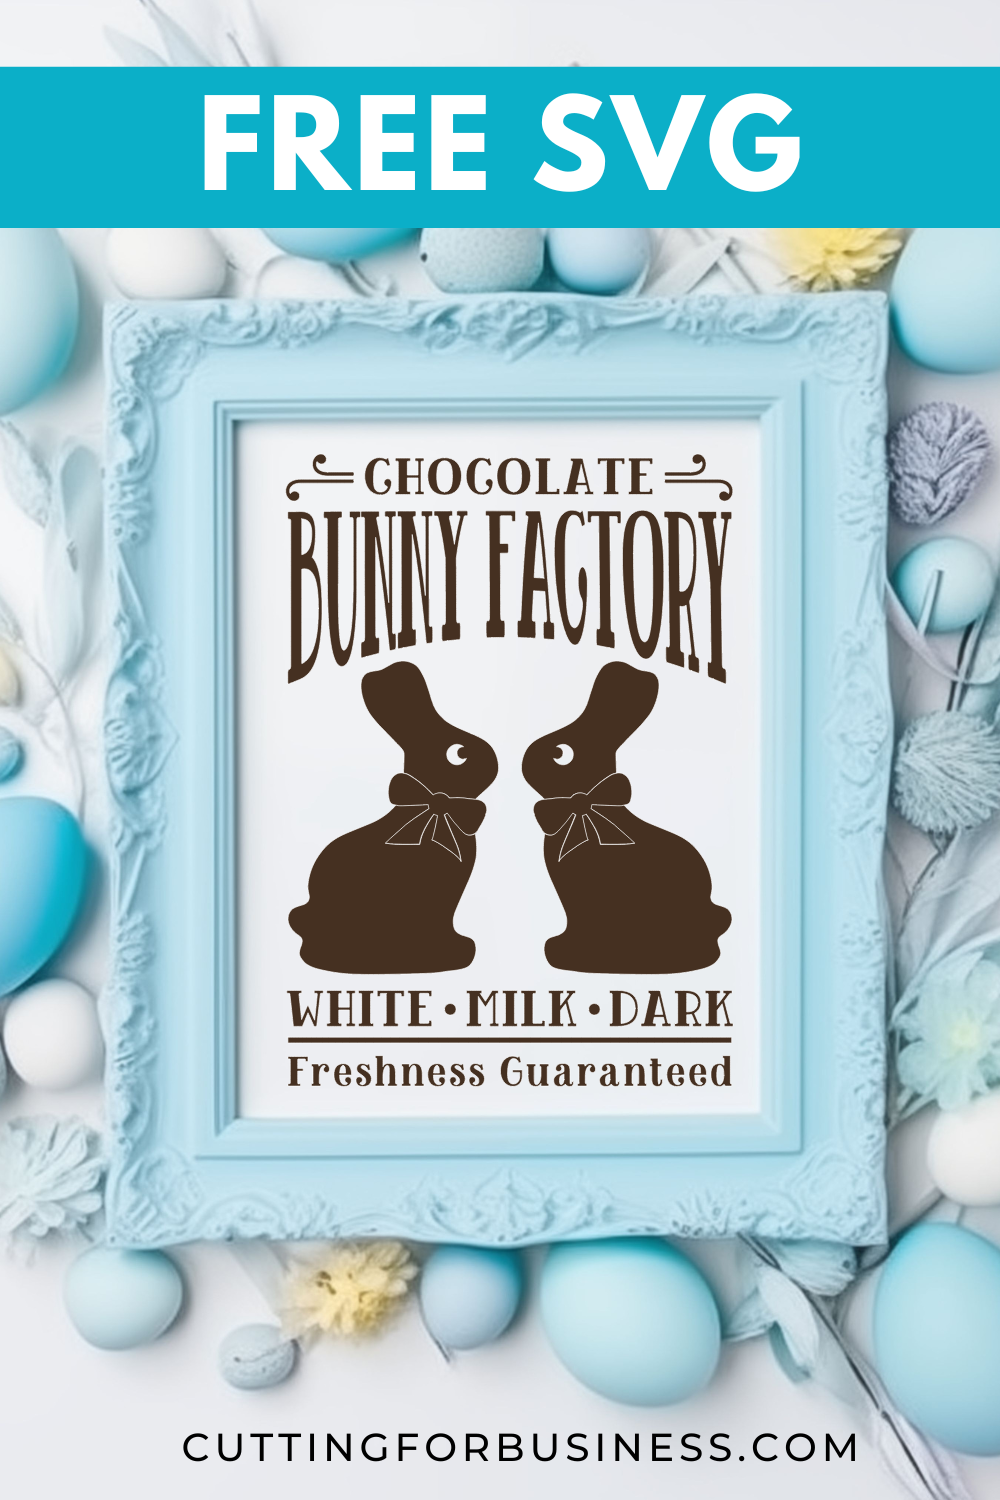 Free Easter Chocolate Bunny Factory SVG - cuttingforbusiness.com